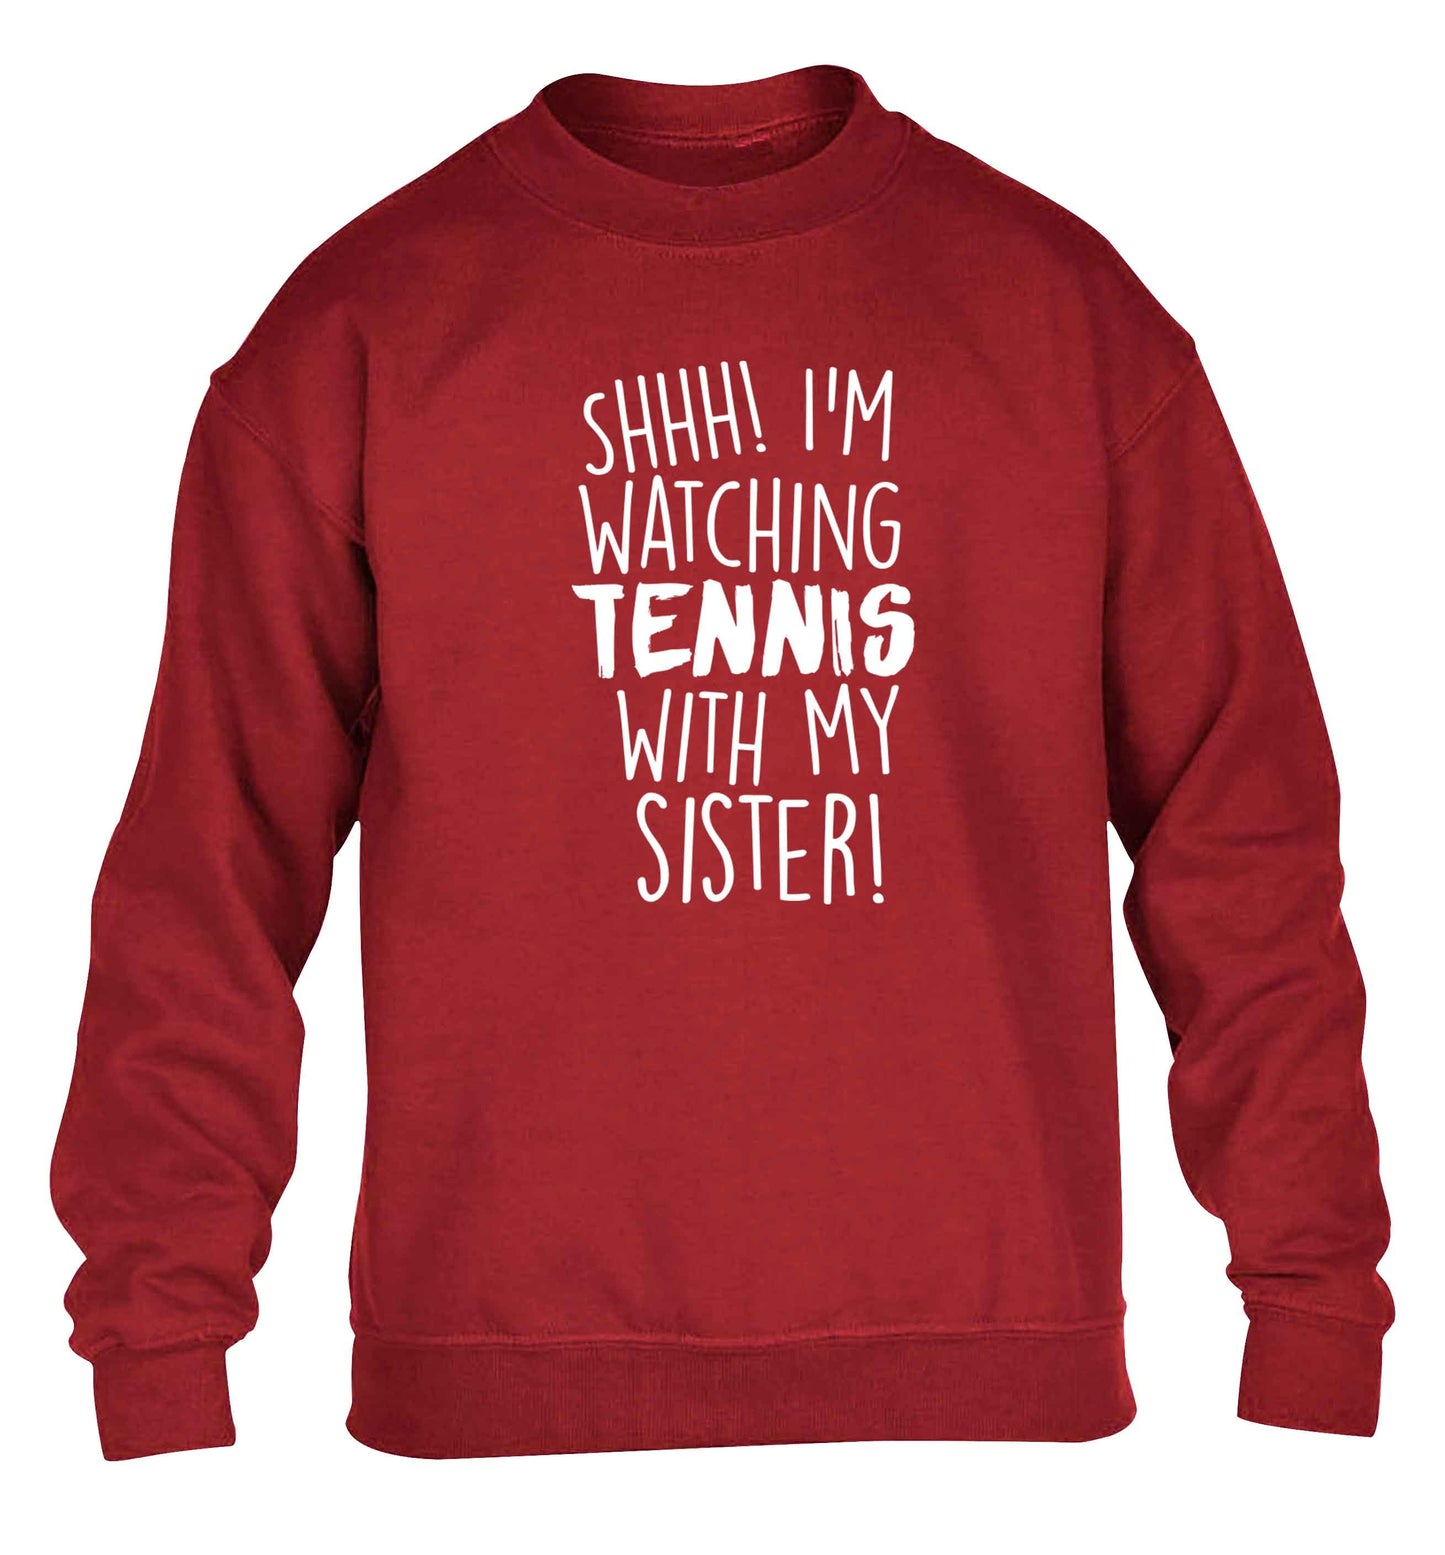 Shh! I'm watching tennis with my sister! children's grey sweater 12-13 Years